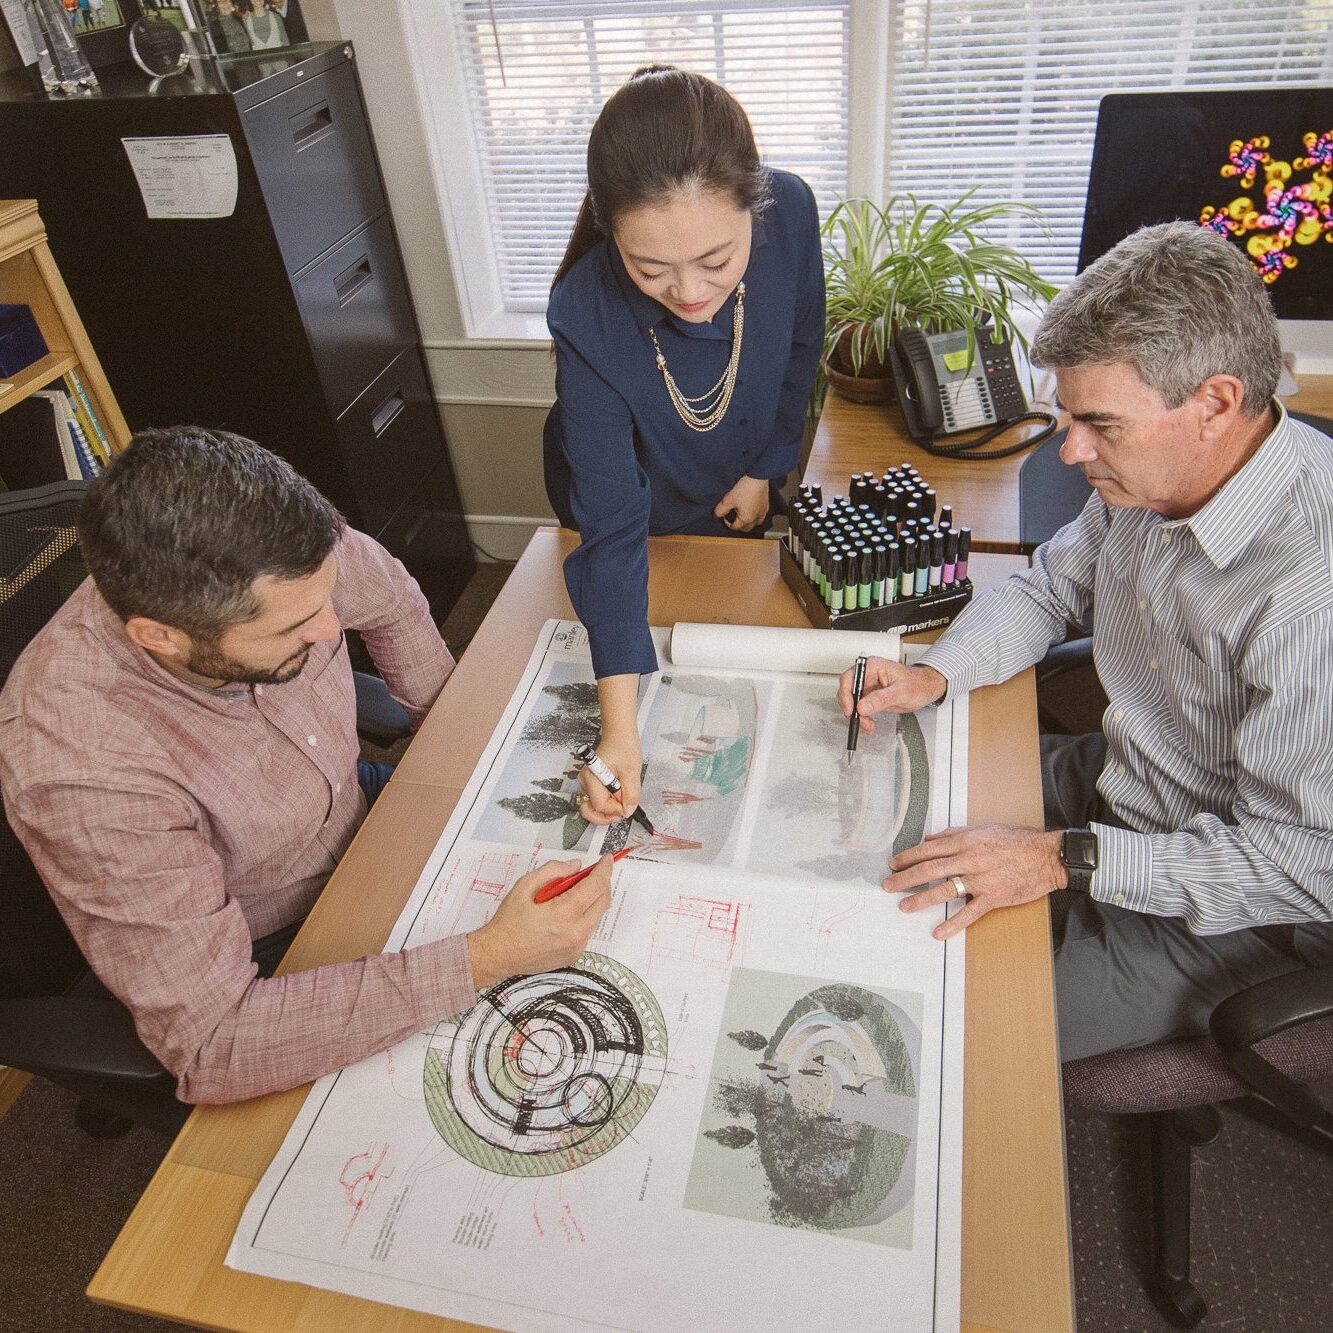 Three landscaping architects working on blueprints together at Manley Land Design office